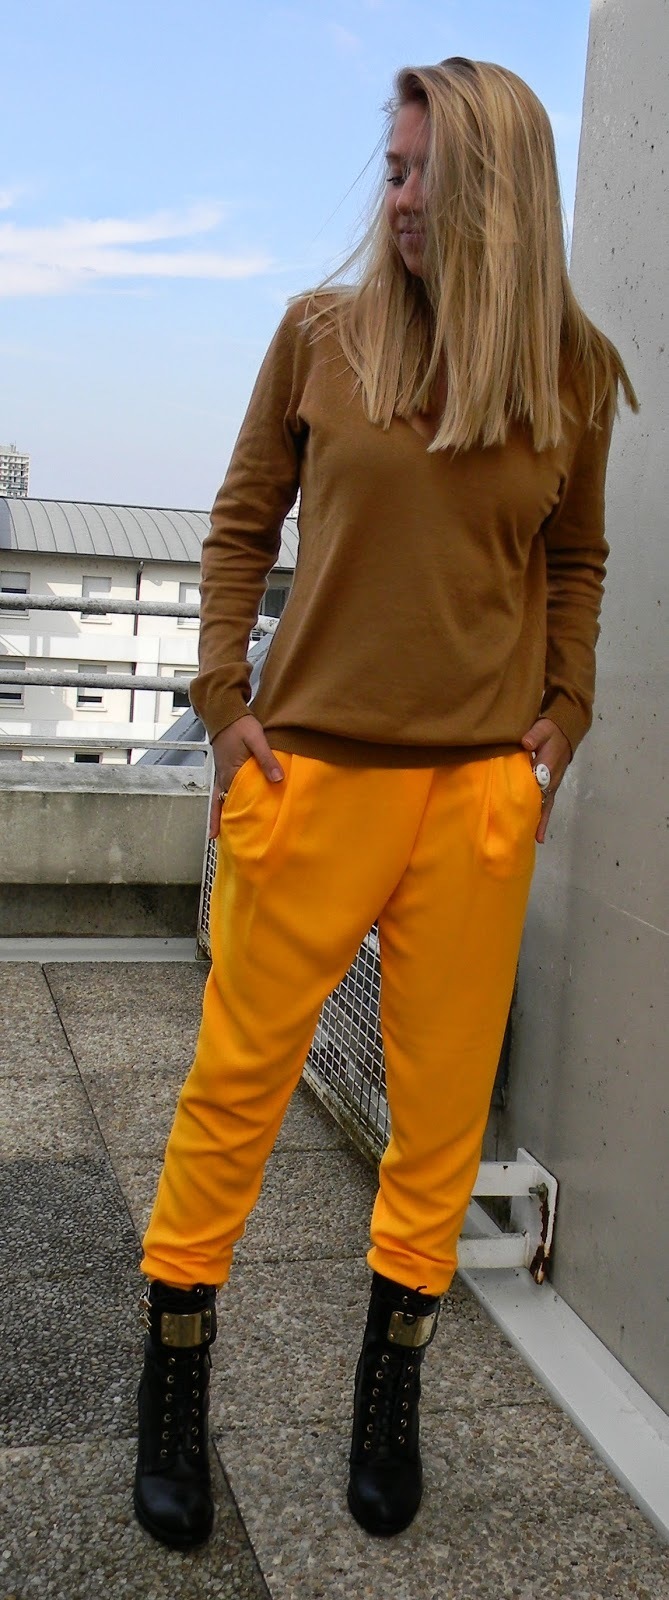 Orange Pajama Pants Outfits For Women (3 ideas & outfits)